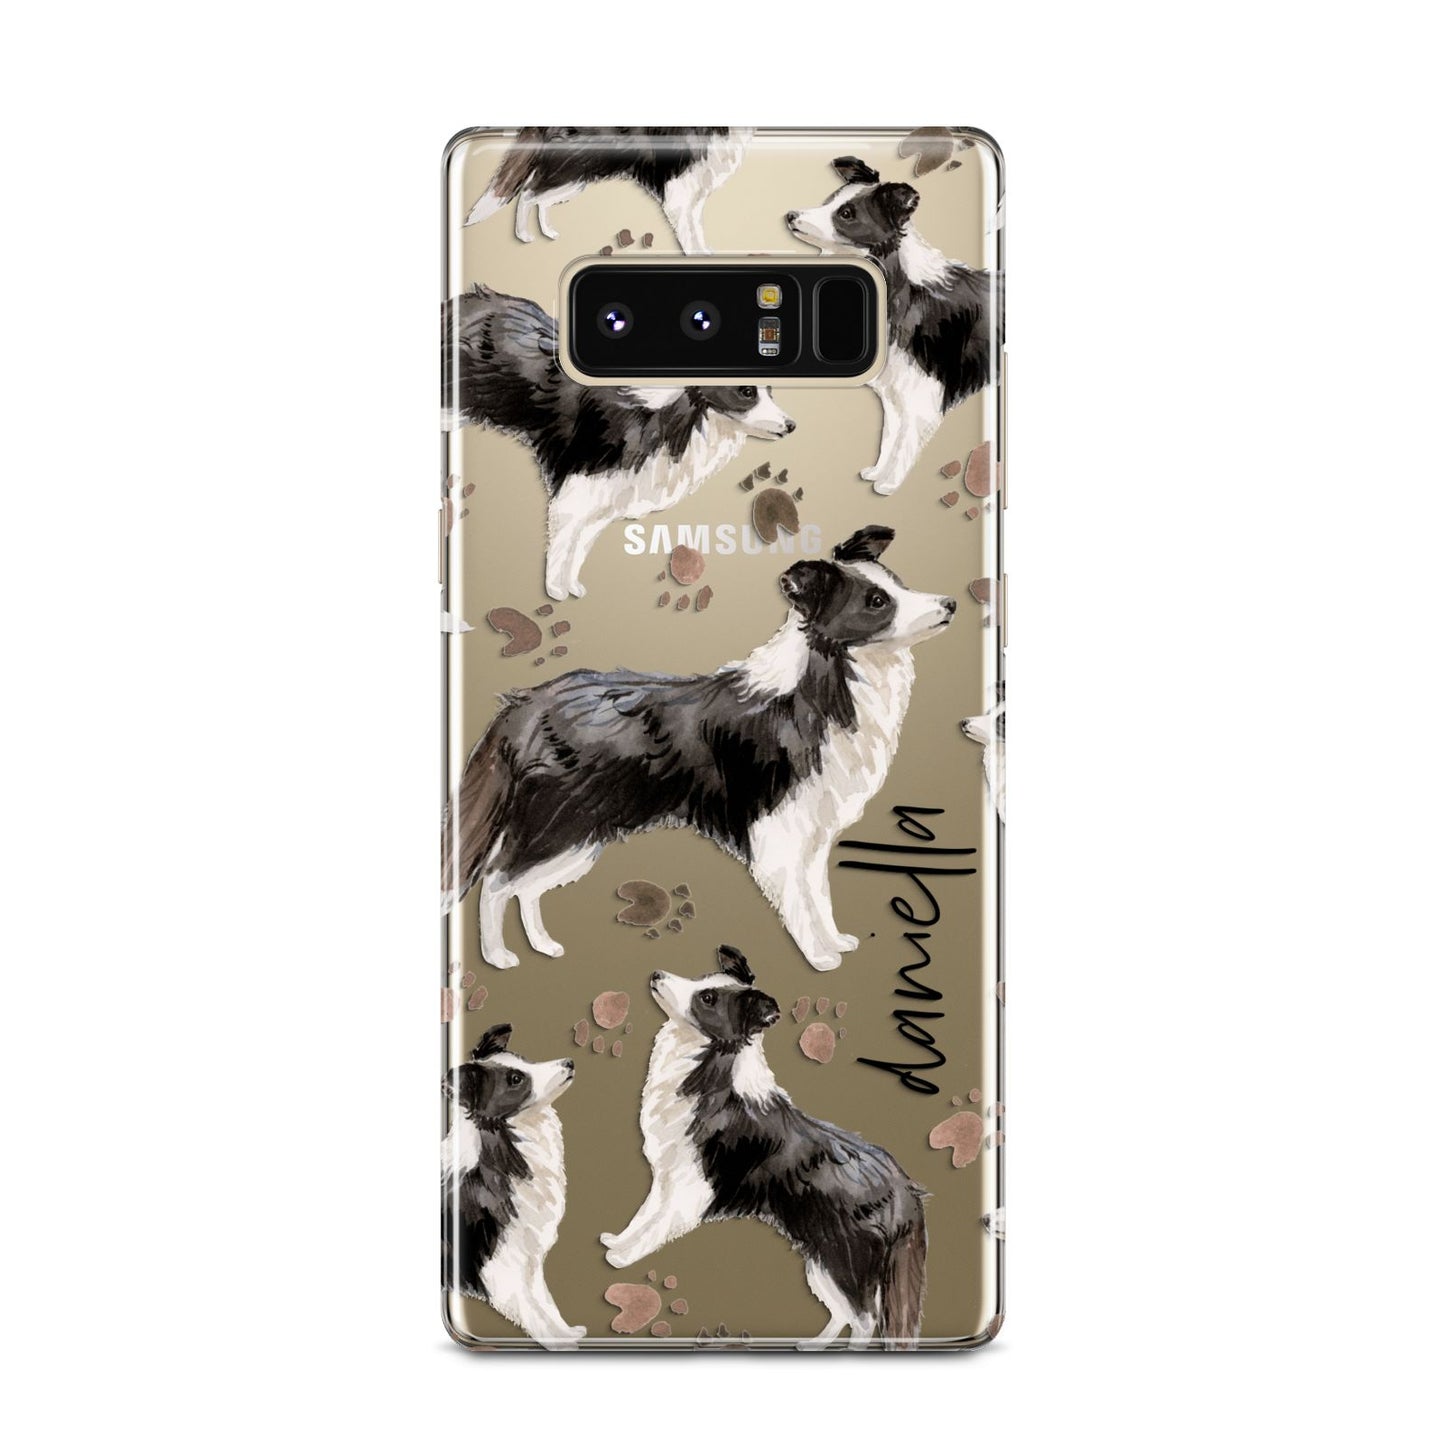 Personalised Border Collie Dog Samsung Galaxy Note 8 Case